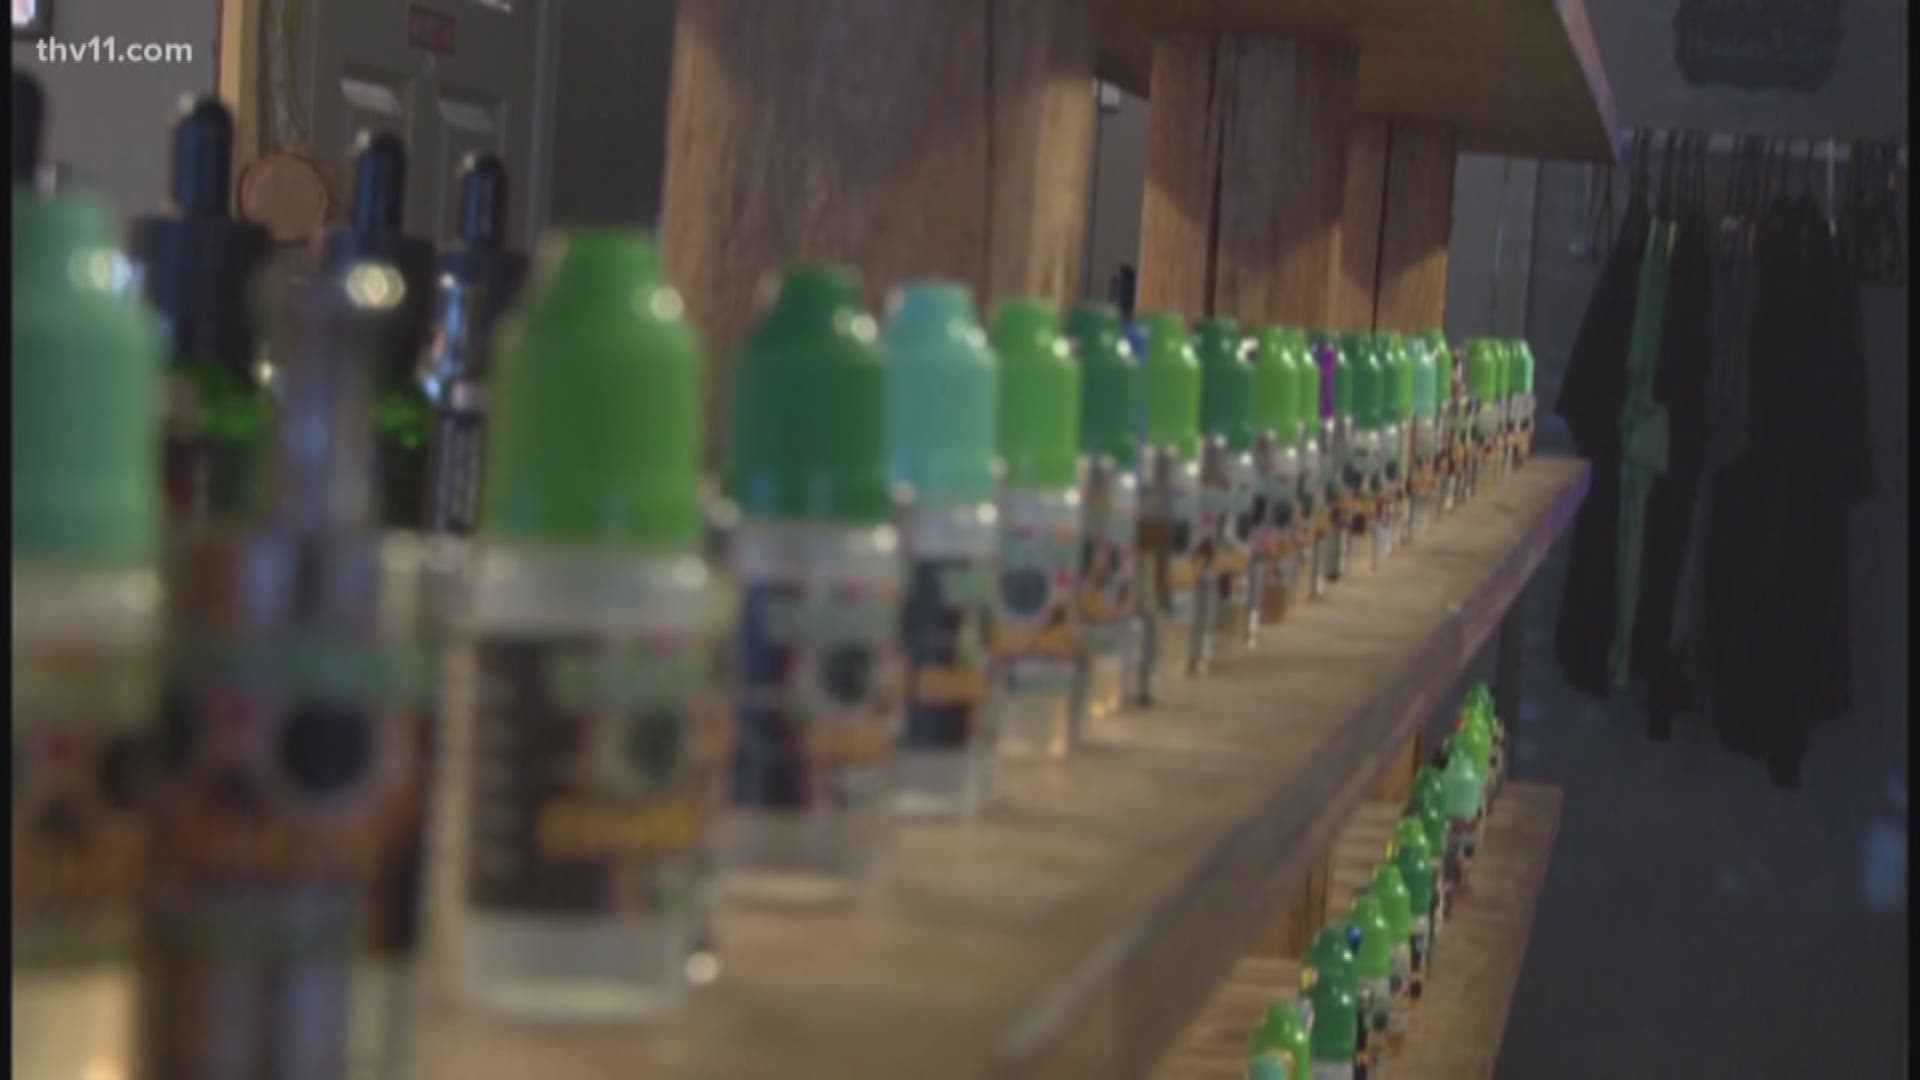 Thousands of kids have gone to the hospital in the past year from drinking vaping liquids, many of which resembled candies and food.